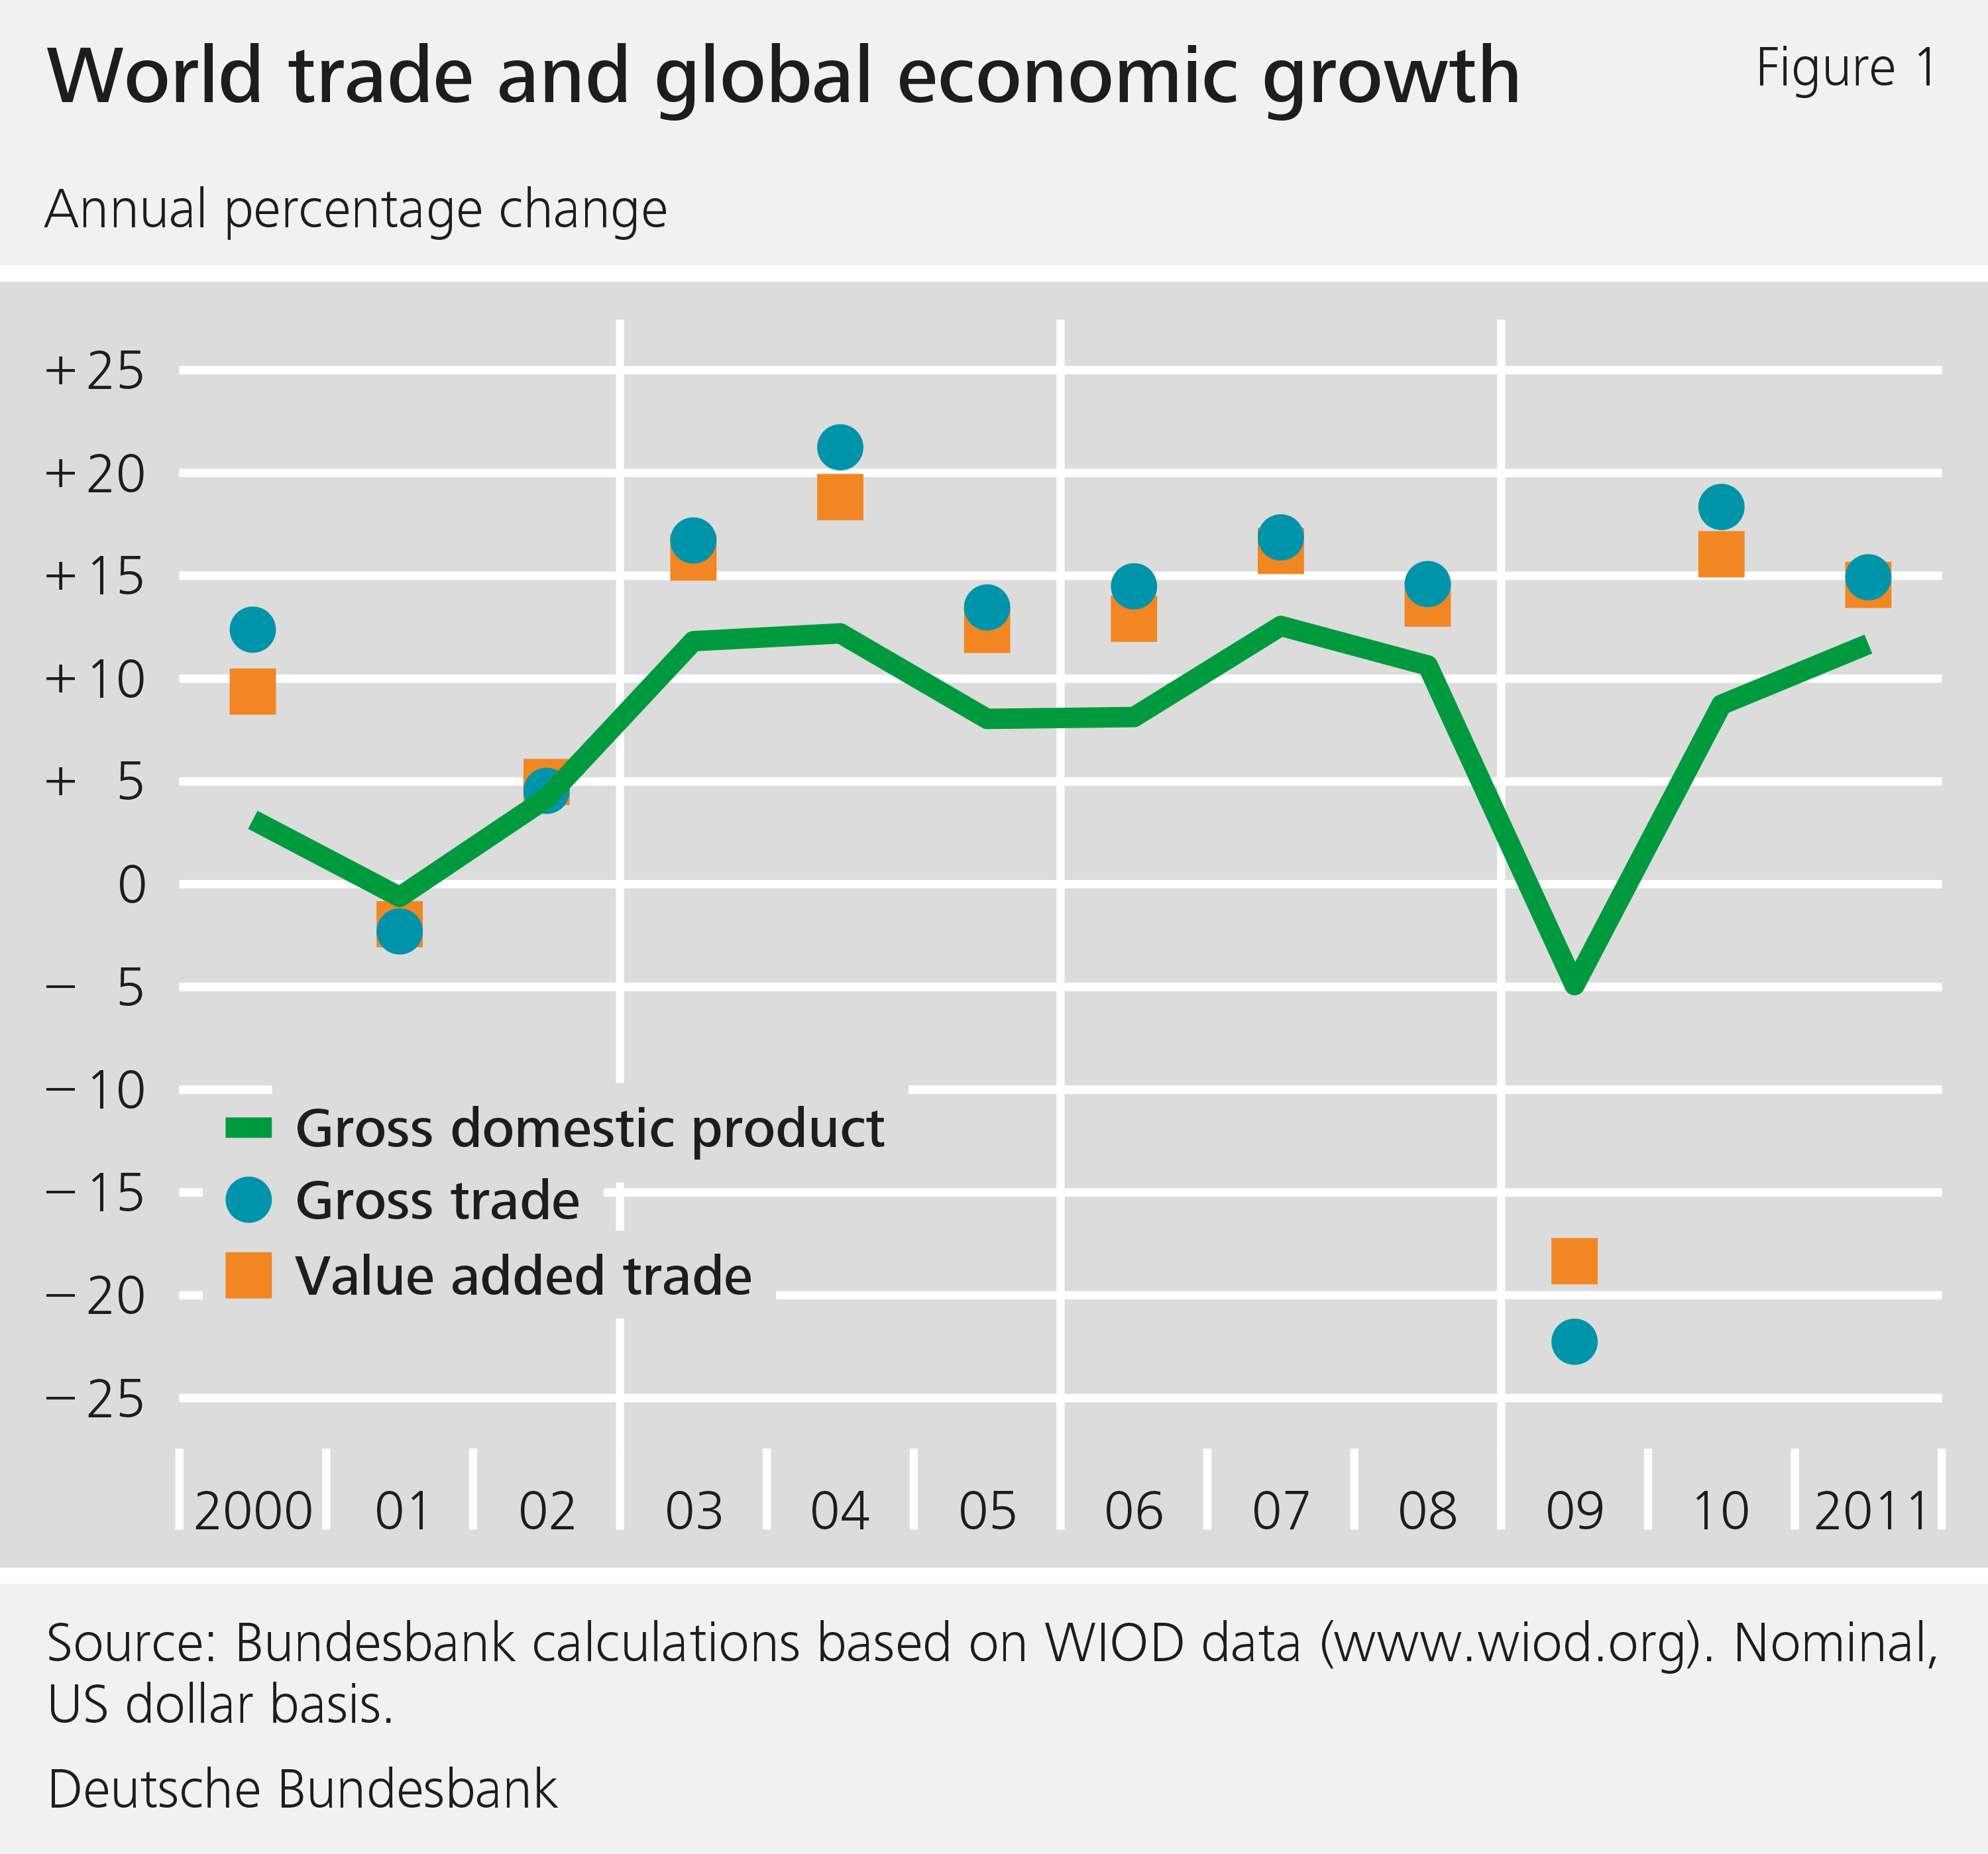 Figure 1: World trade and global economic growth